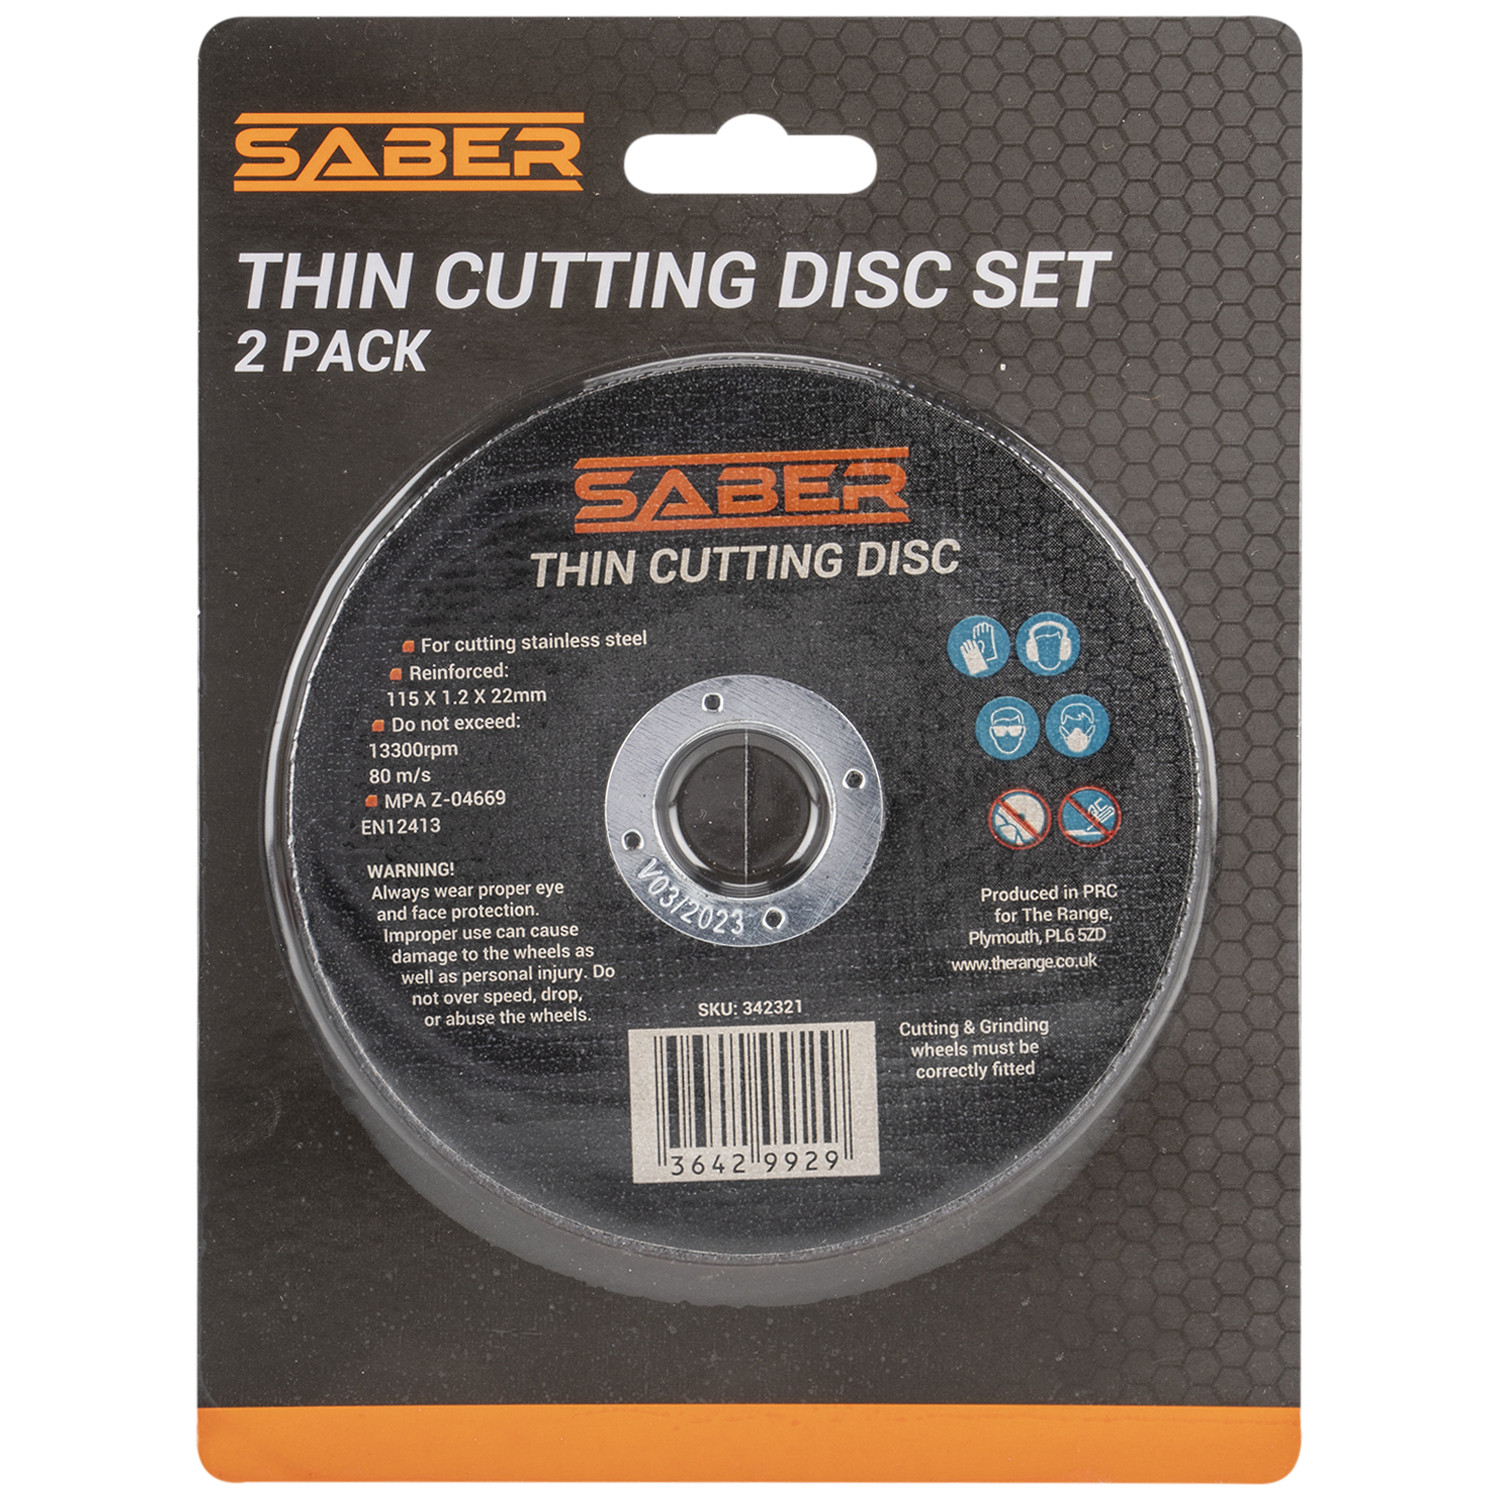 Saber Thin Cutting Disc Plate 2 Pack Image